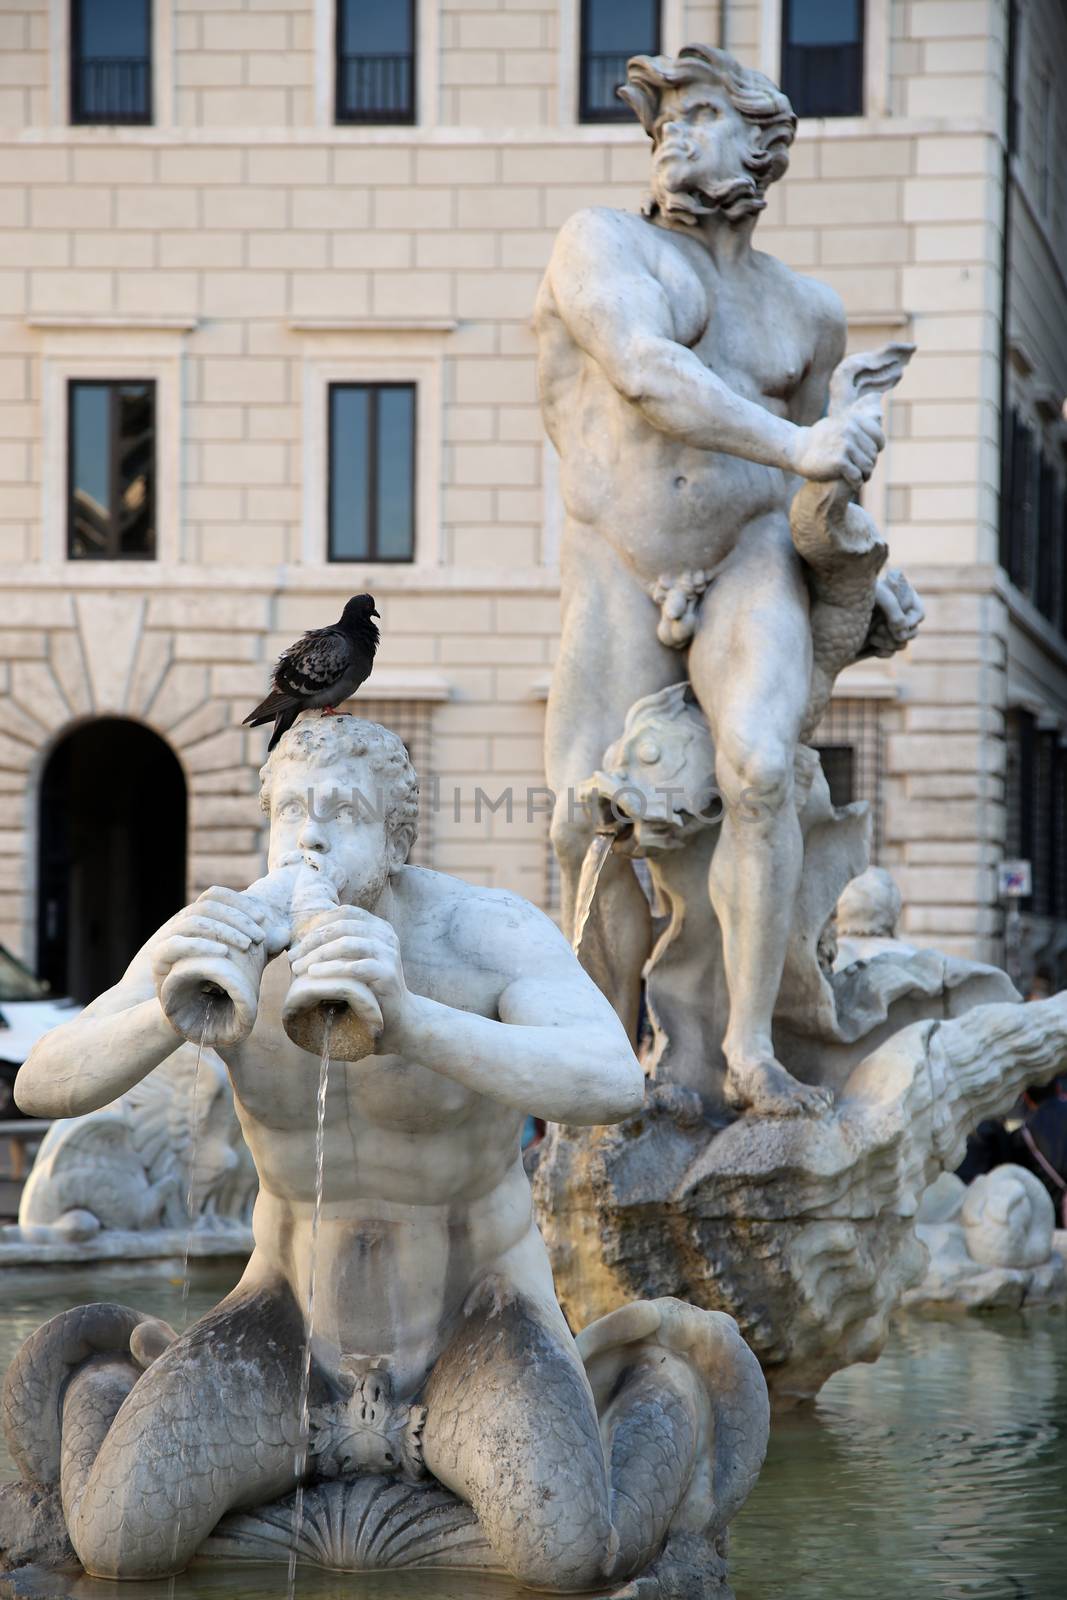 Pigeon sitting on a sculpture Marble Triton, Fontana del Moro in Piazza Navona